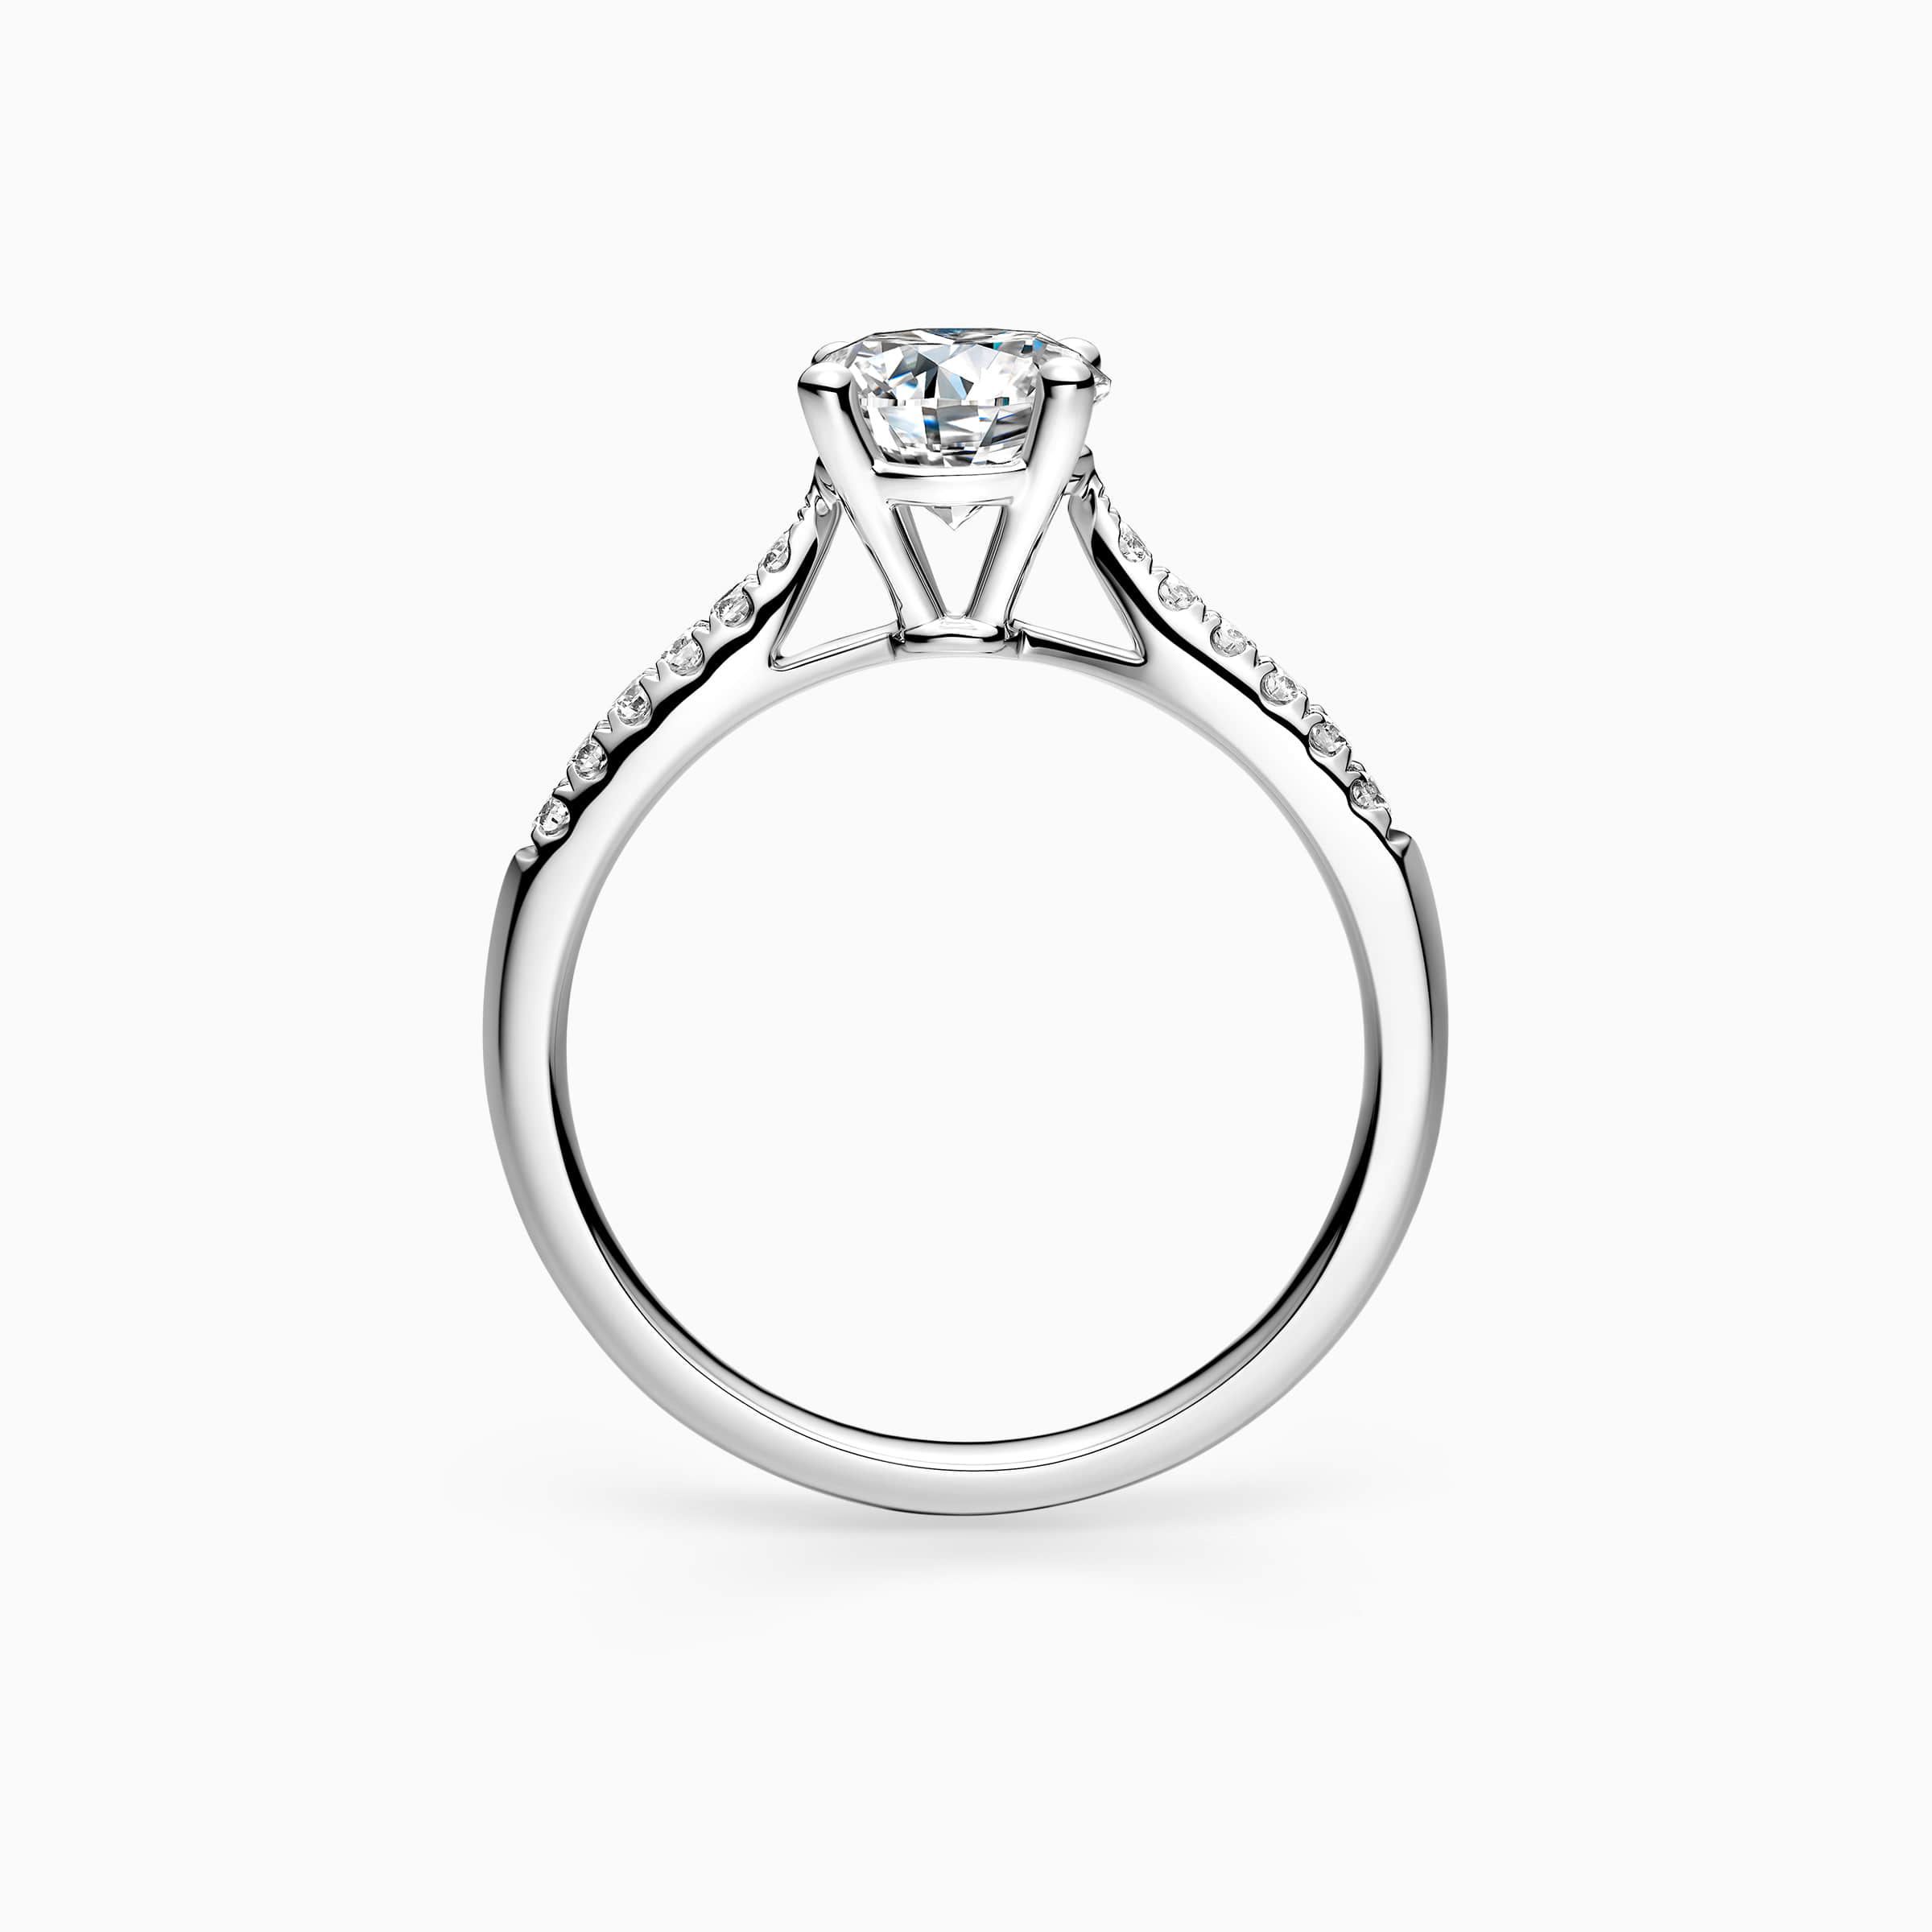 darry ring 4 prong engagement ring side view